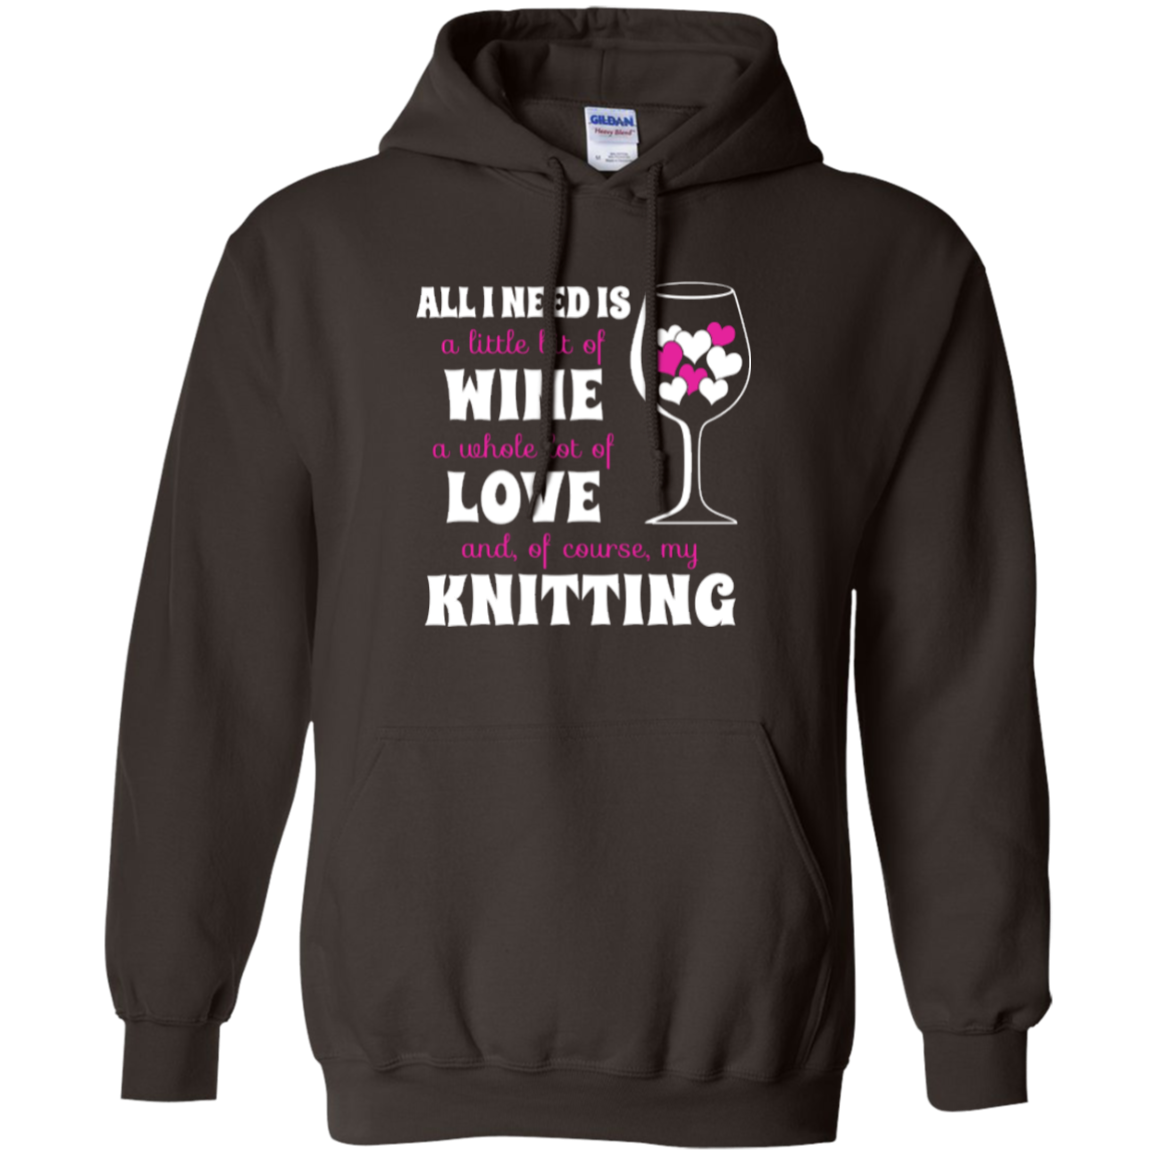 All I Need is Wine-Love-Knitting Pullover Hoodies - Crafter4Life - 6